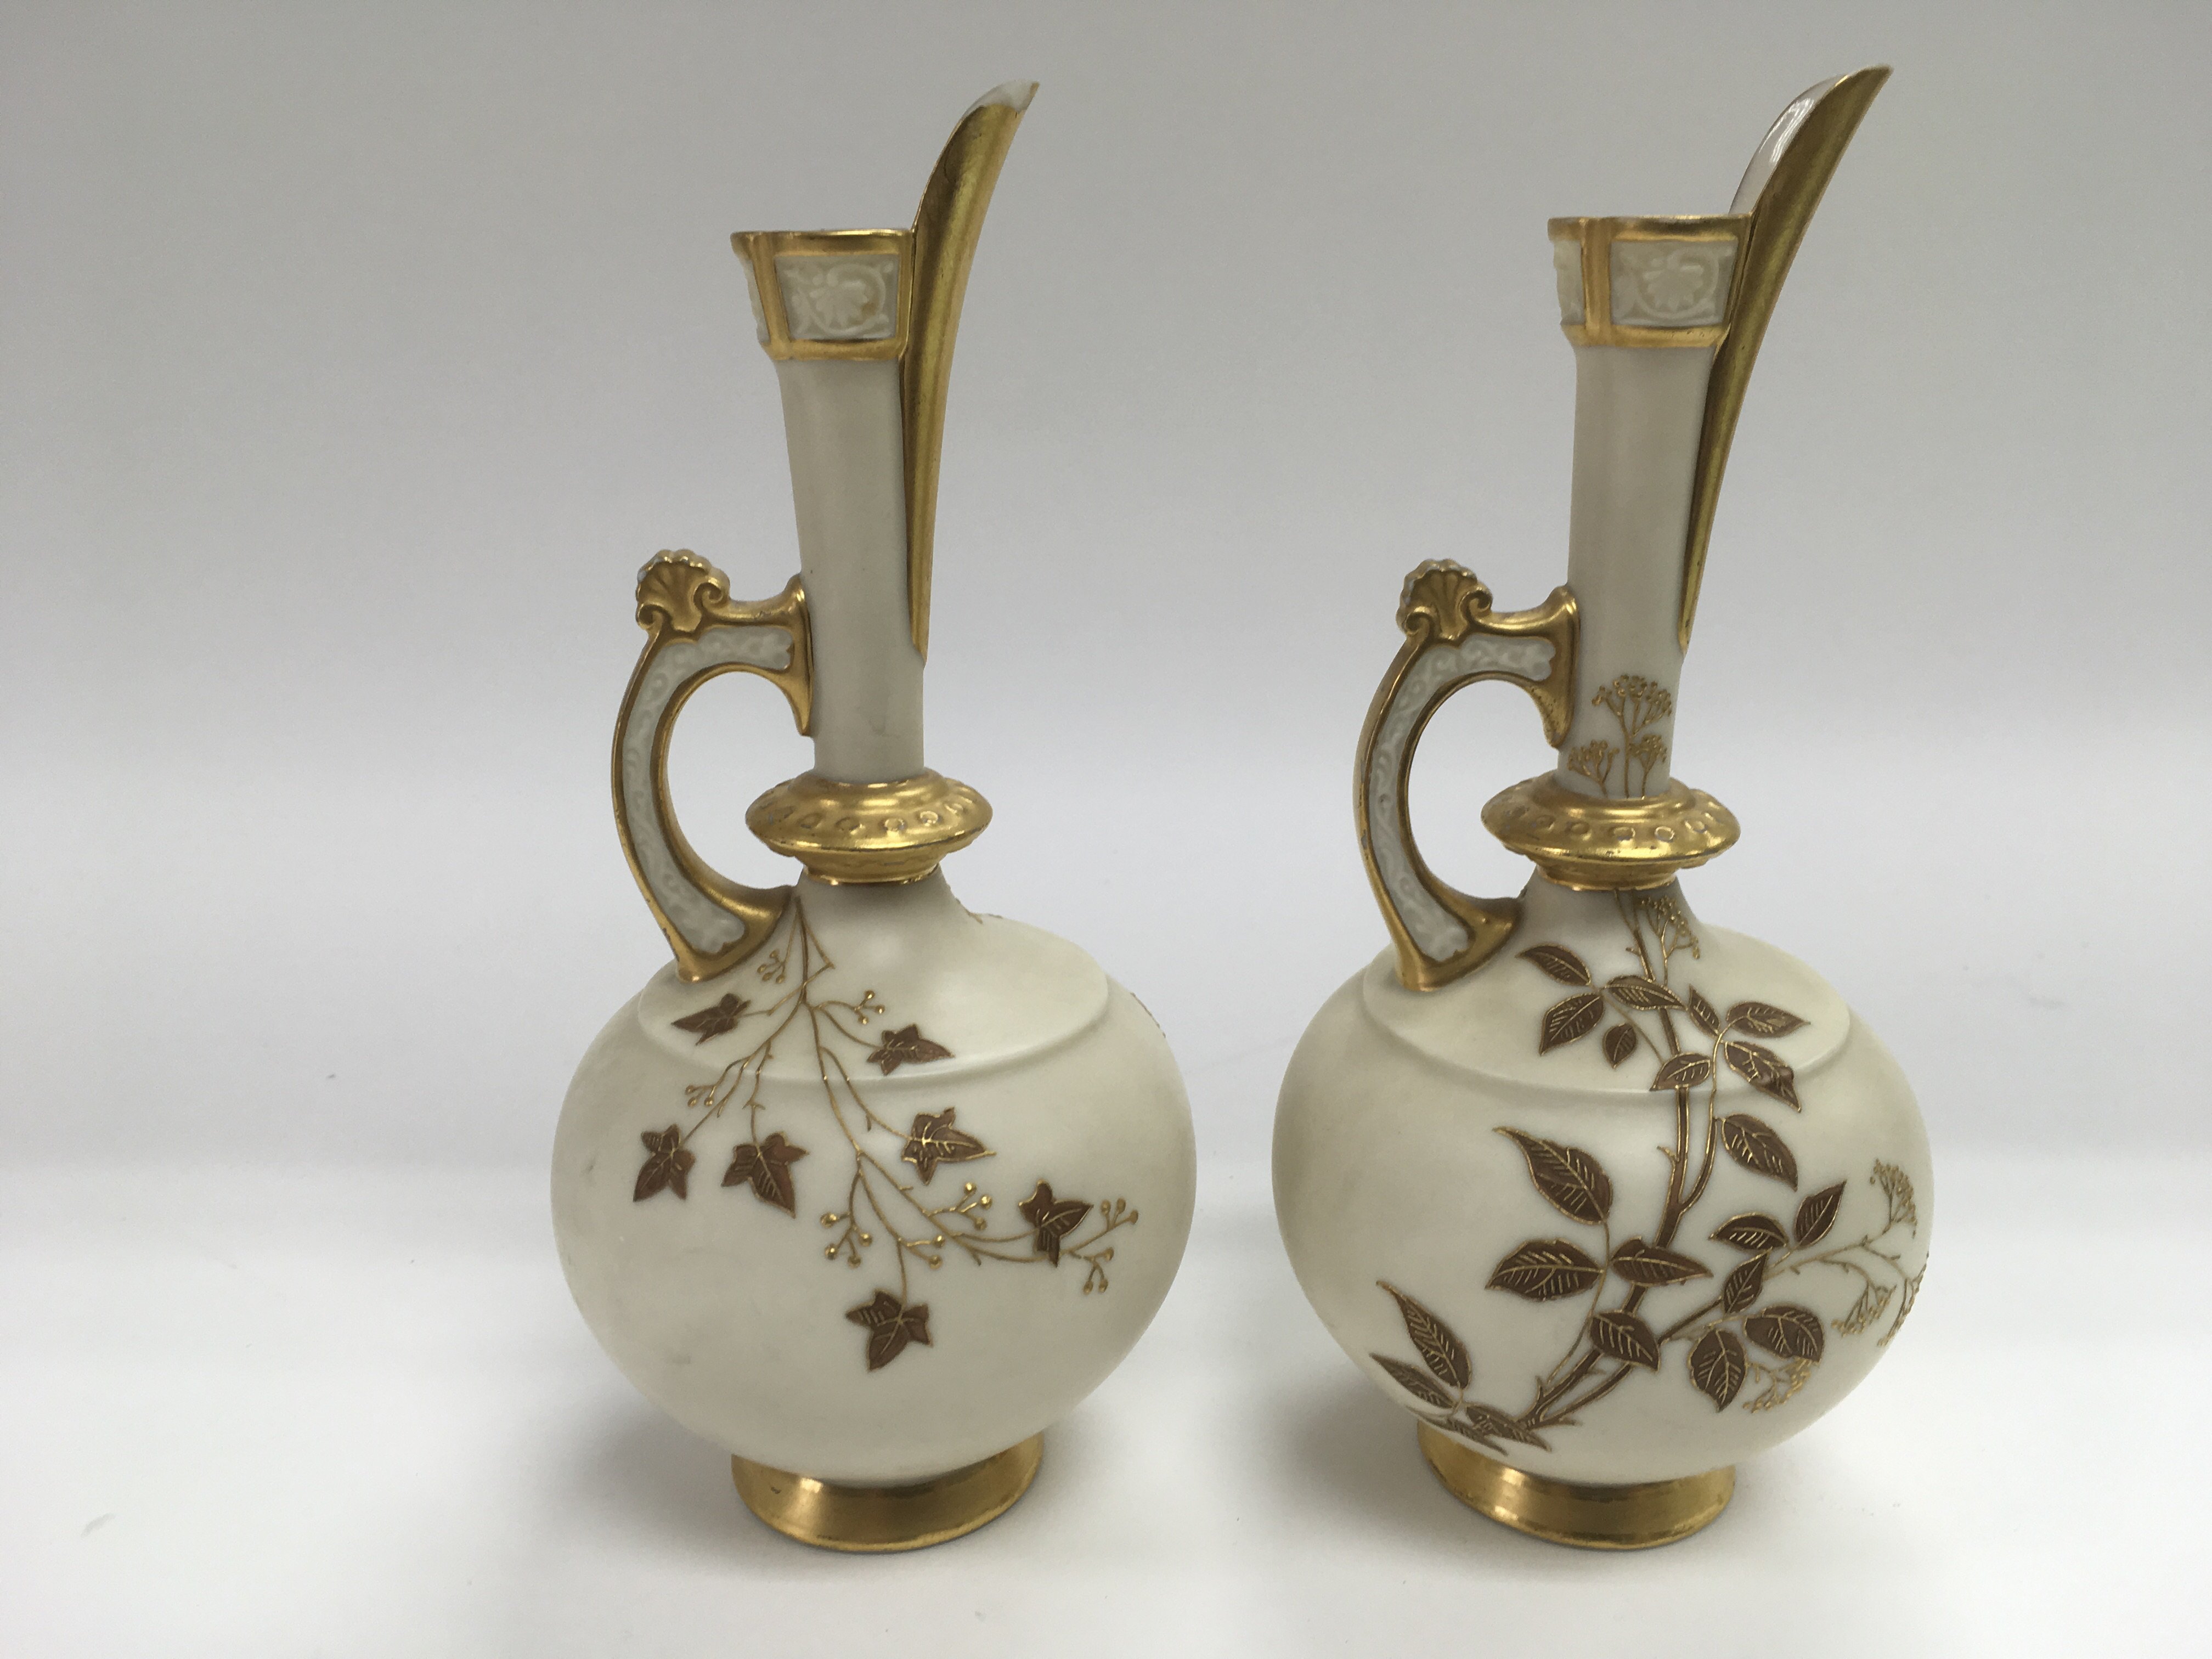 A pair of Royal Worcester jugs with giltwork decor - Image 2 of 3